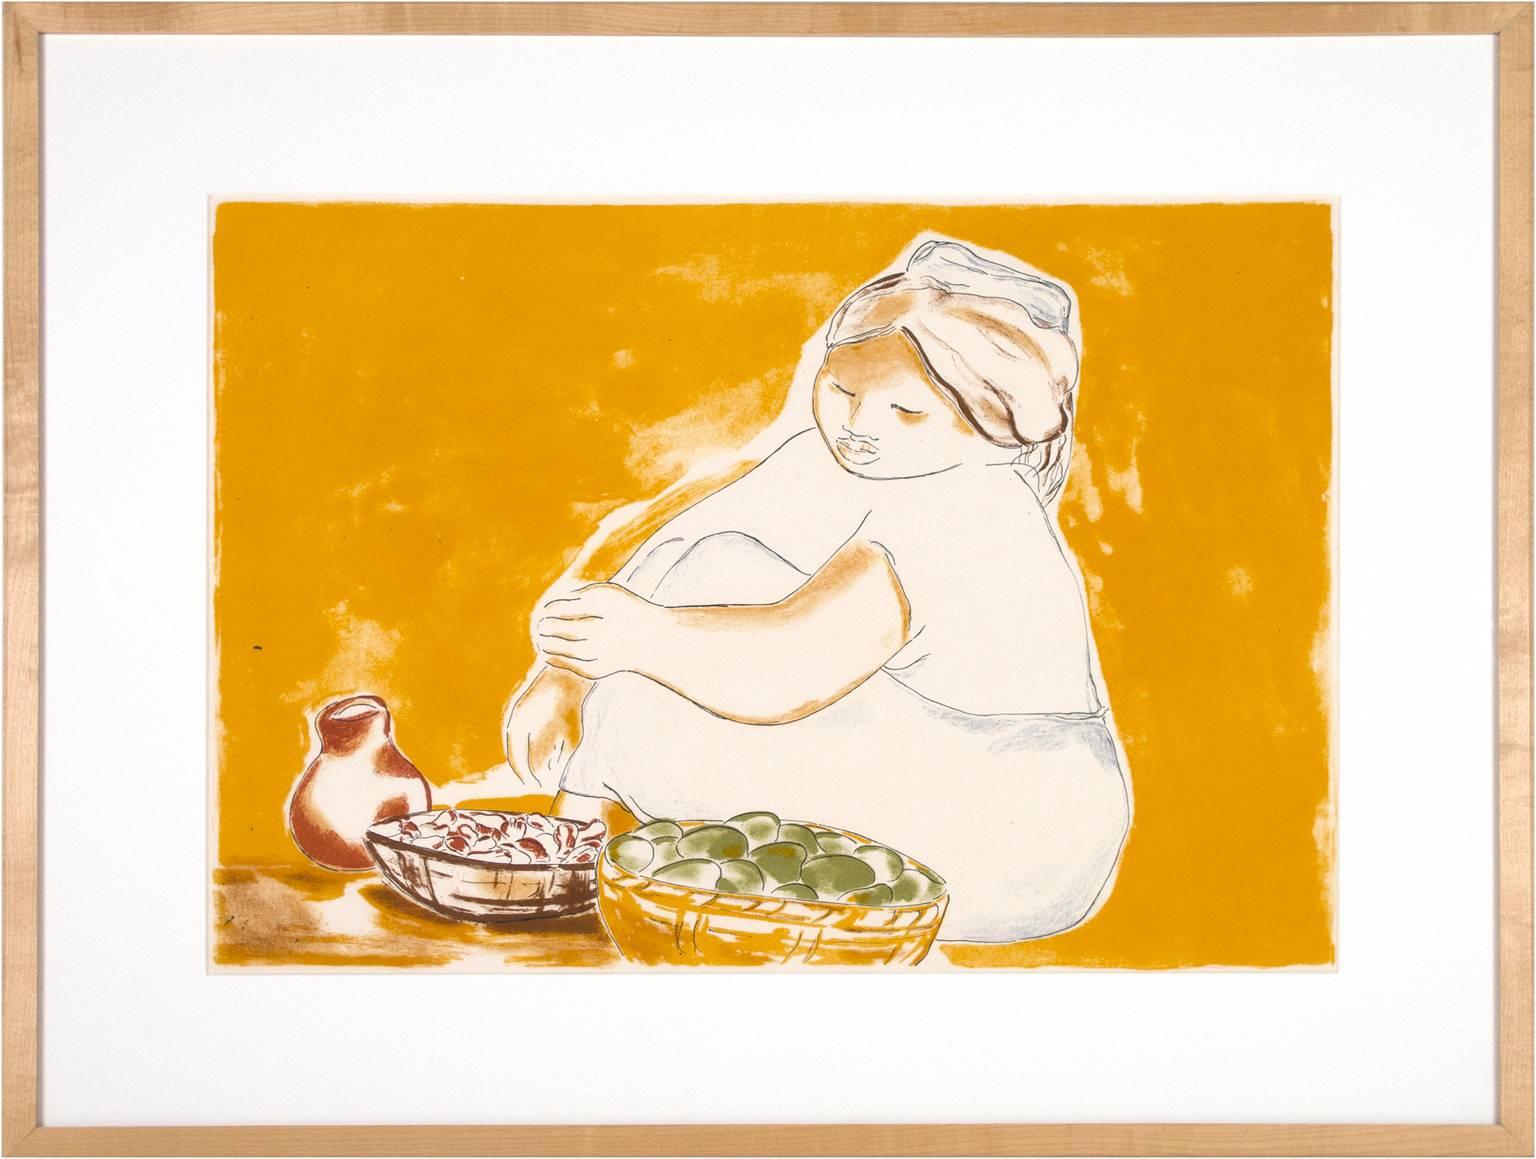 Angelika Thusius Figurative Print - "Untitled (Woman with 2 Baskets and 1 Pitcher), " Original Color Lithograph A.P.